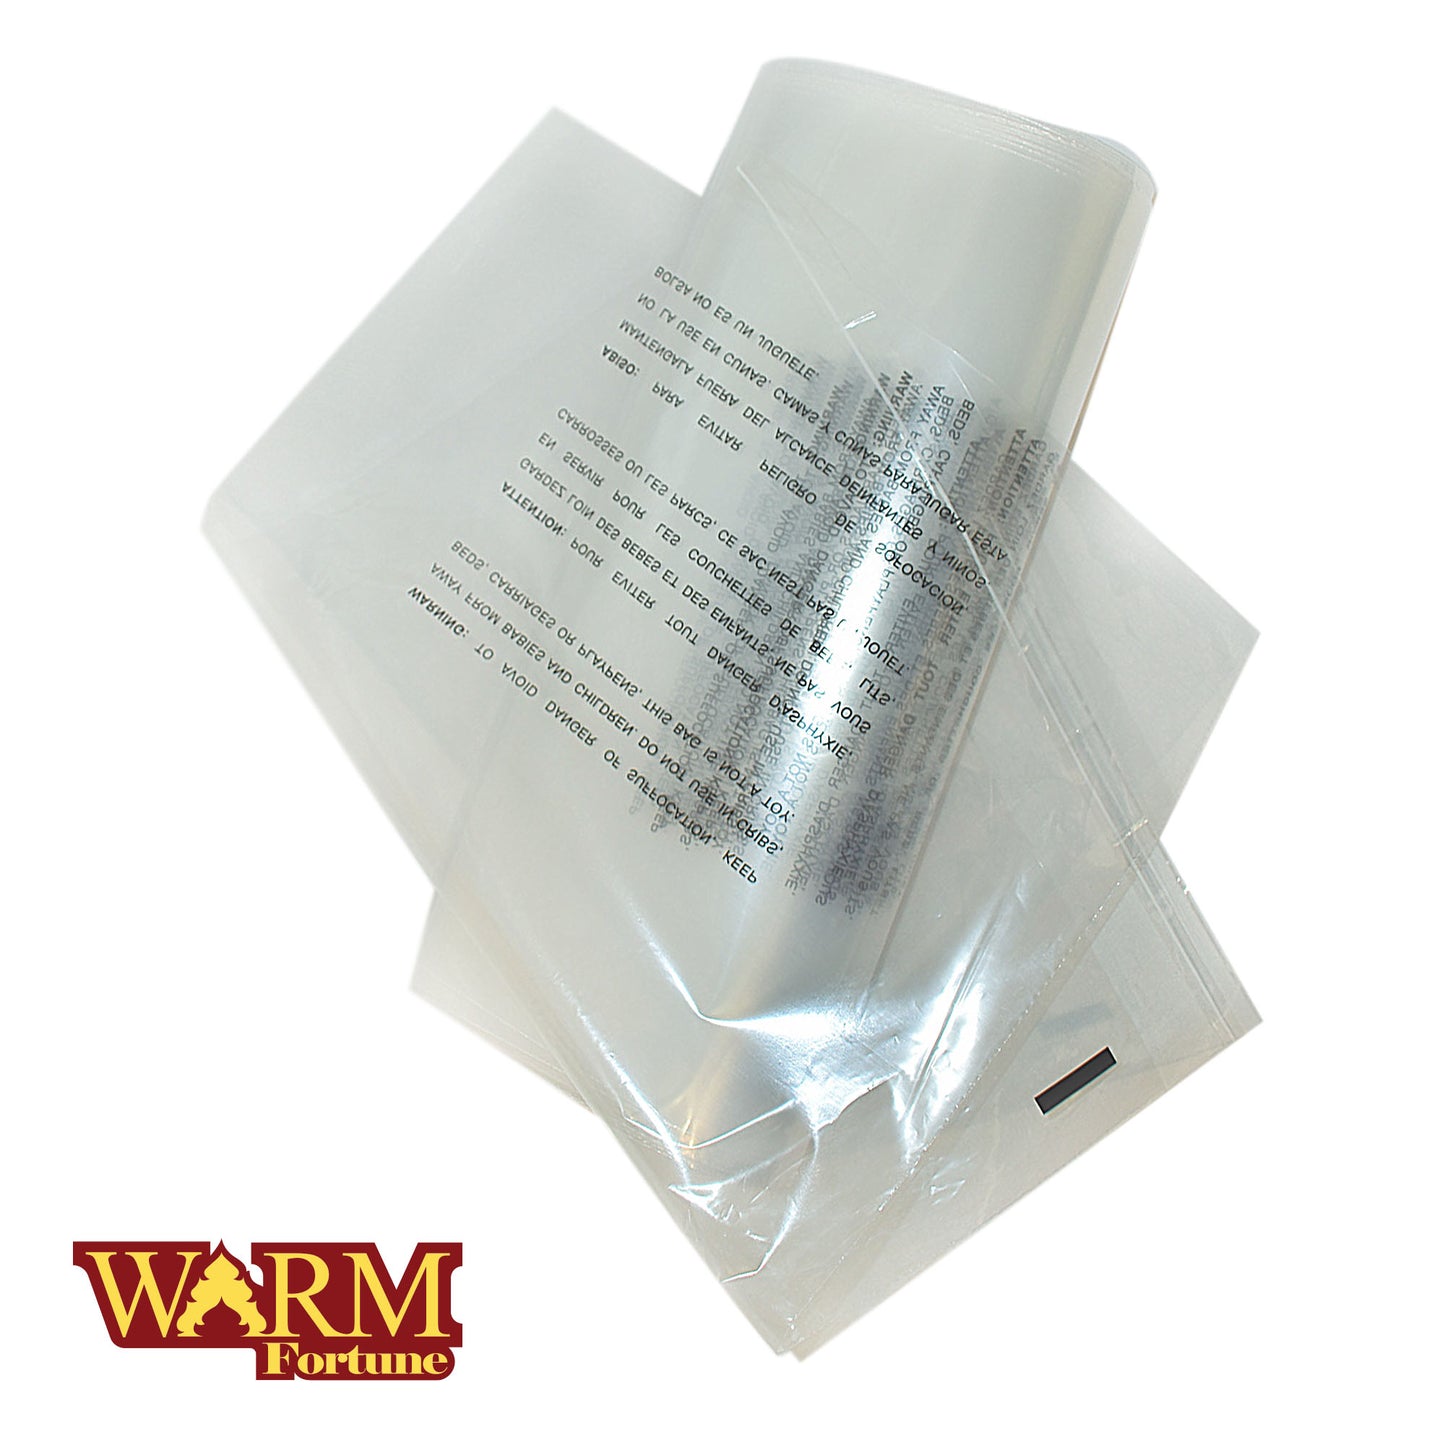 1 Pack 18"x24" Clear Poly Bag, Sets of 100; Self-Sealing Suffocation Warning Mailer Bags